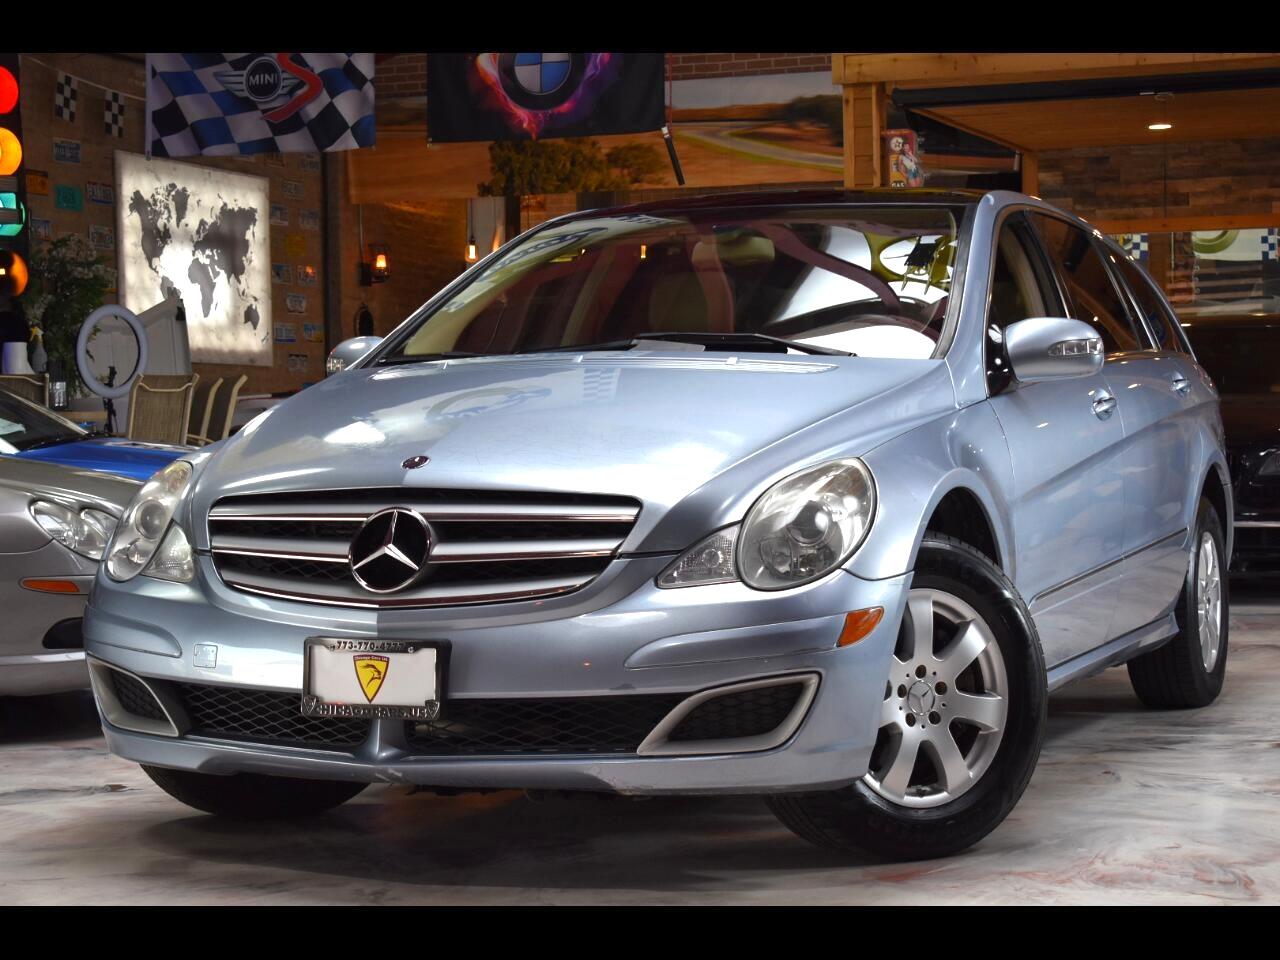 Used 2007 Mercedes-Benz R-Class R320 CDI for Sale in Summit IL 60501  Chicago Cars U.S.